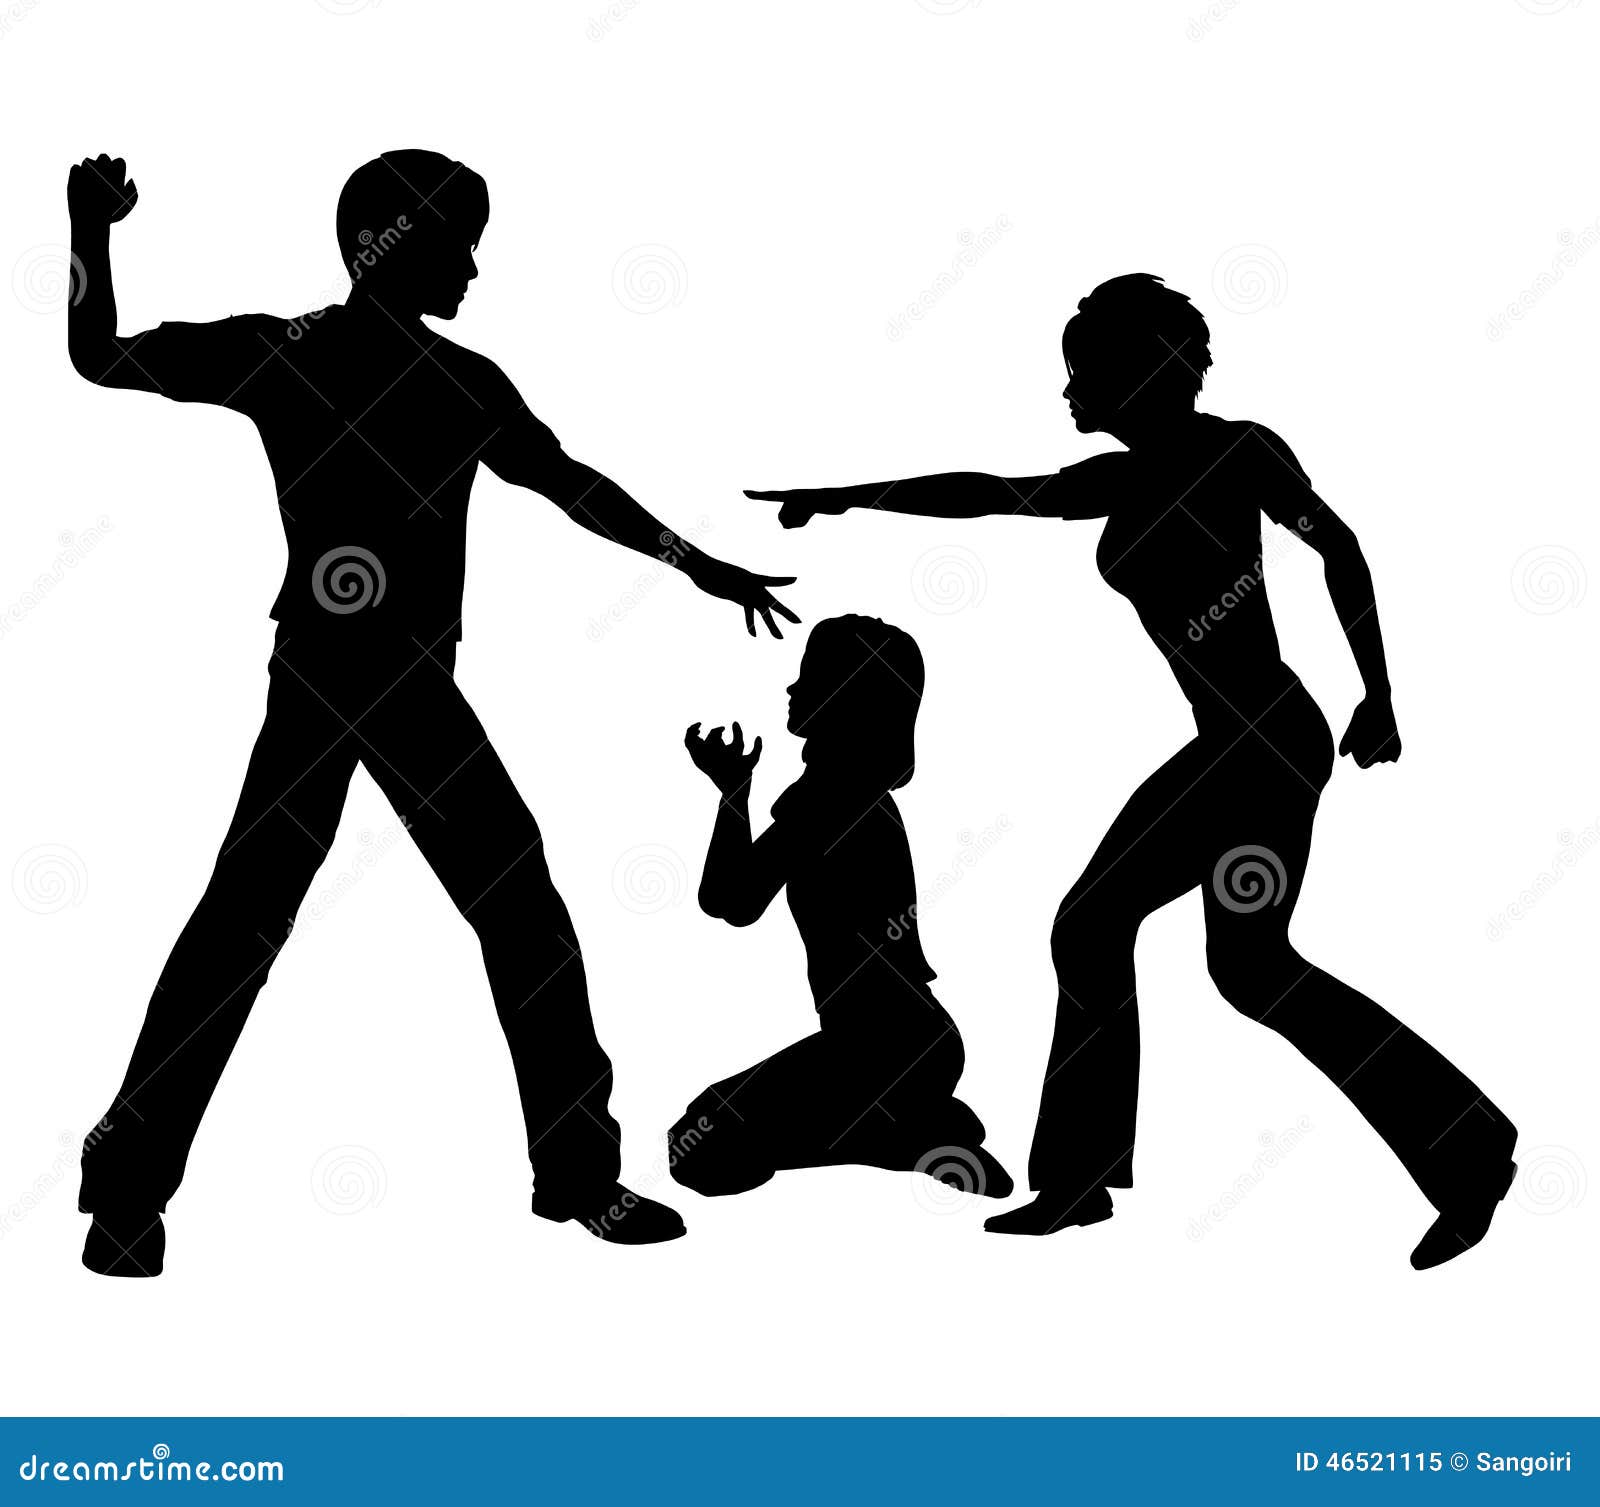 family violence clipart - photo #4